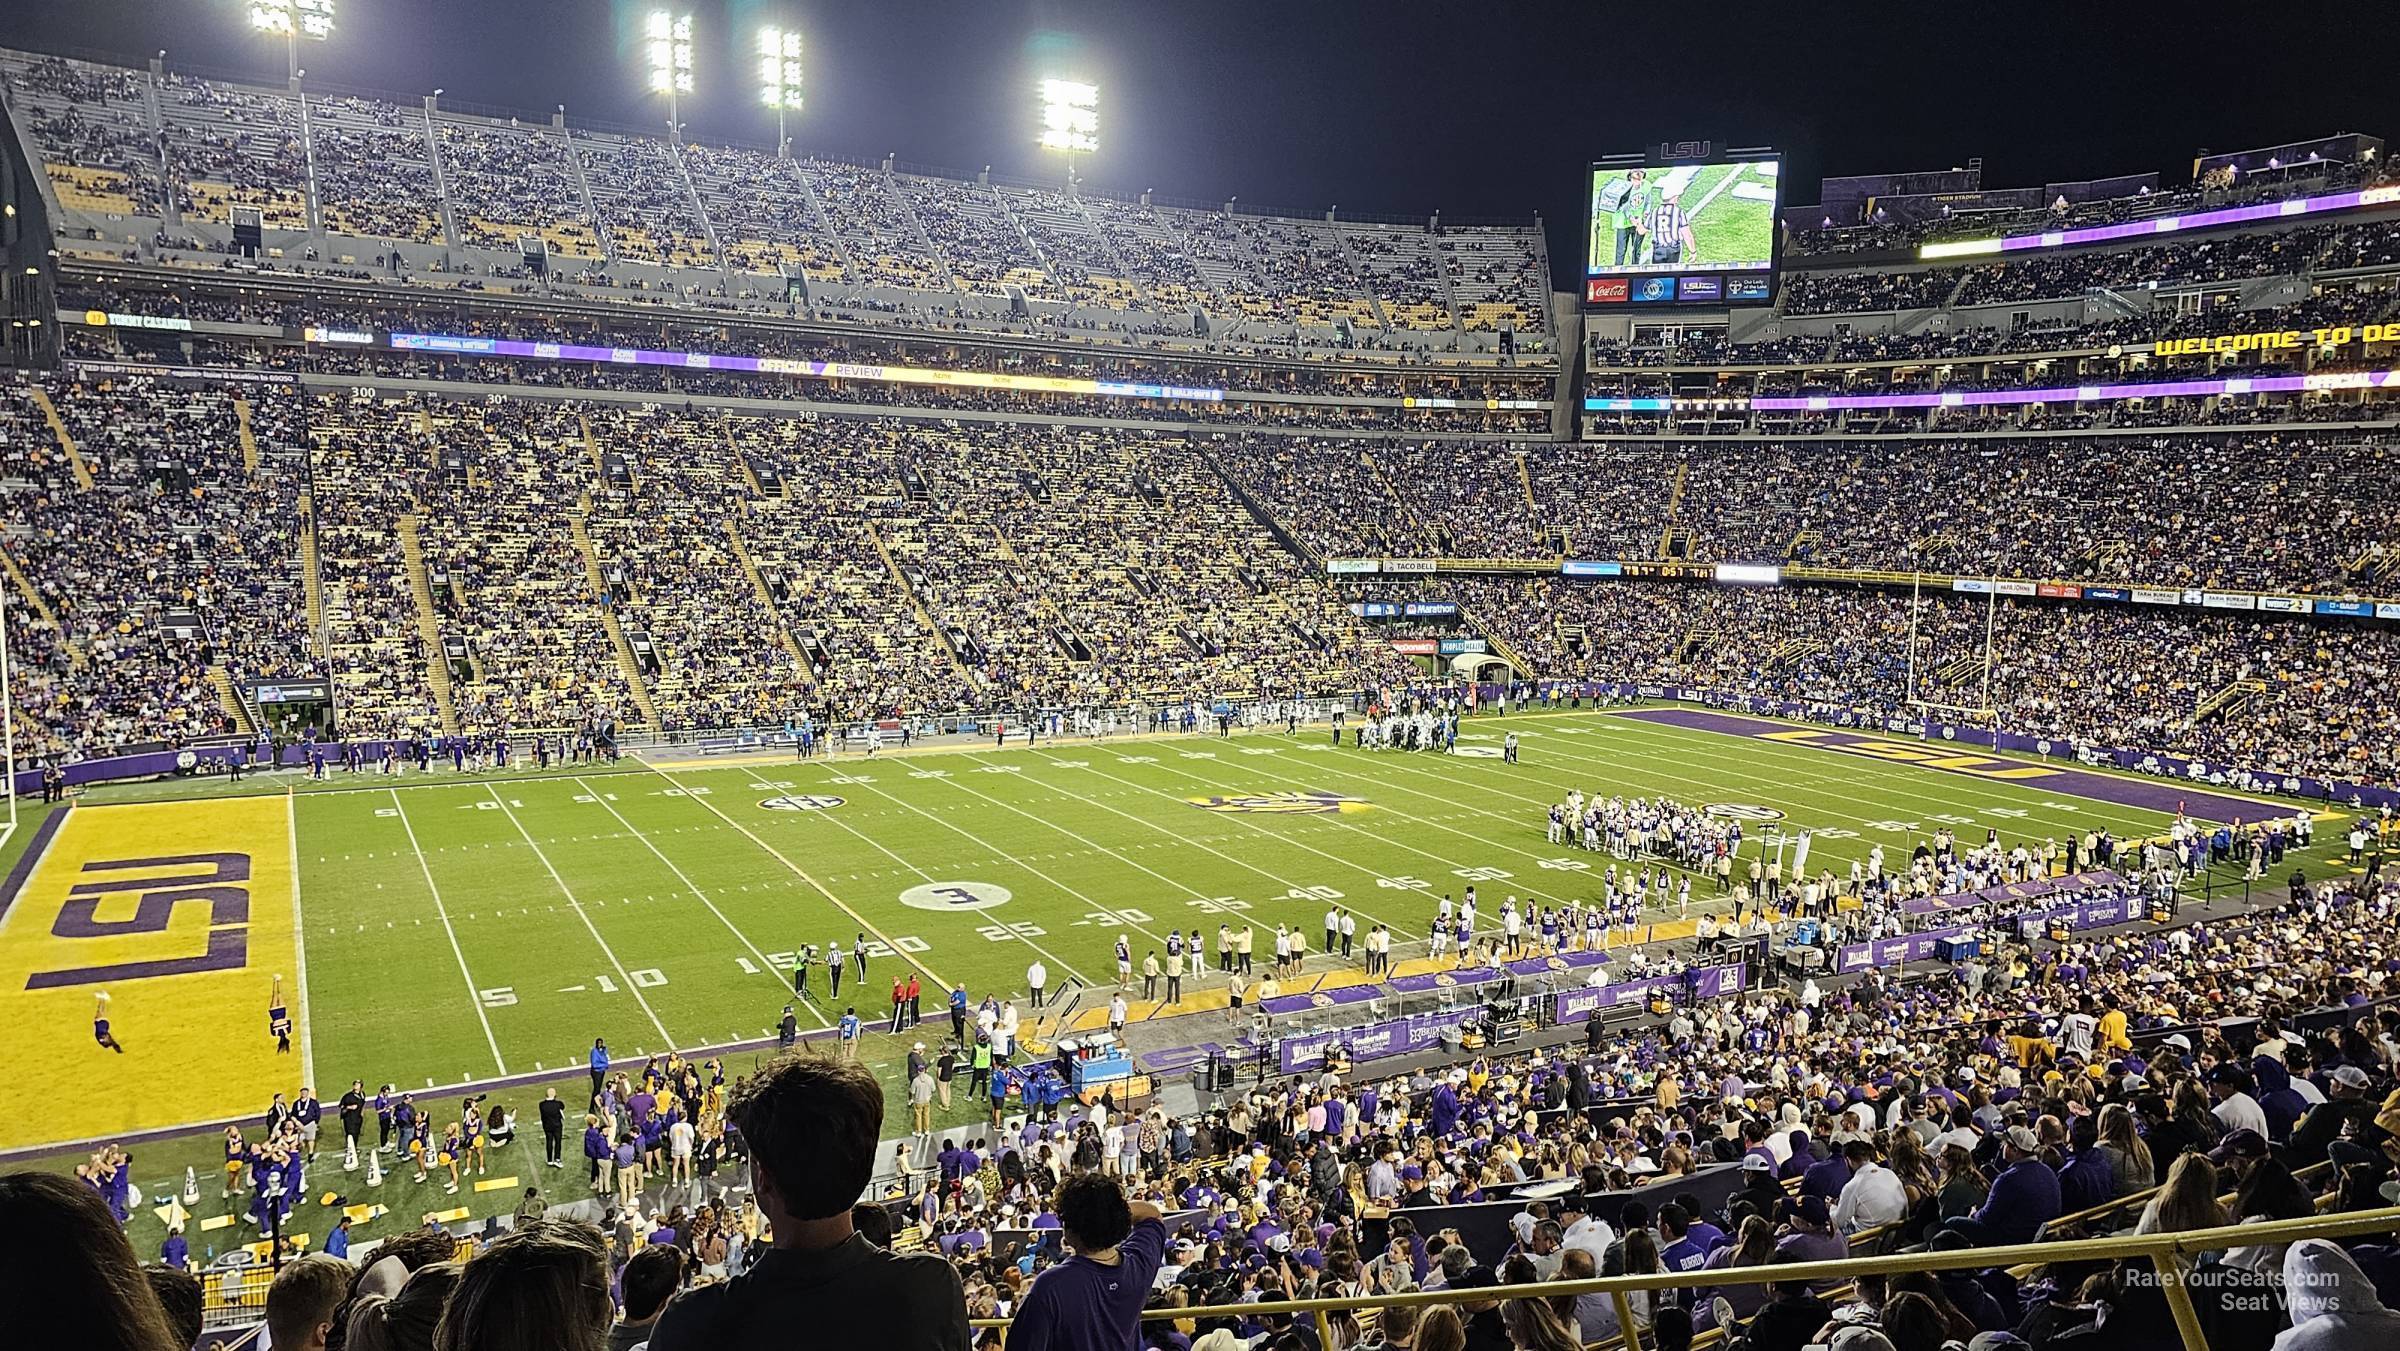 section 222, row 1 seat view  - tiger stadium